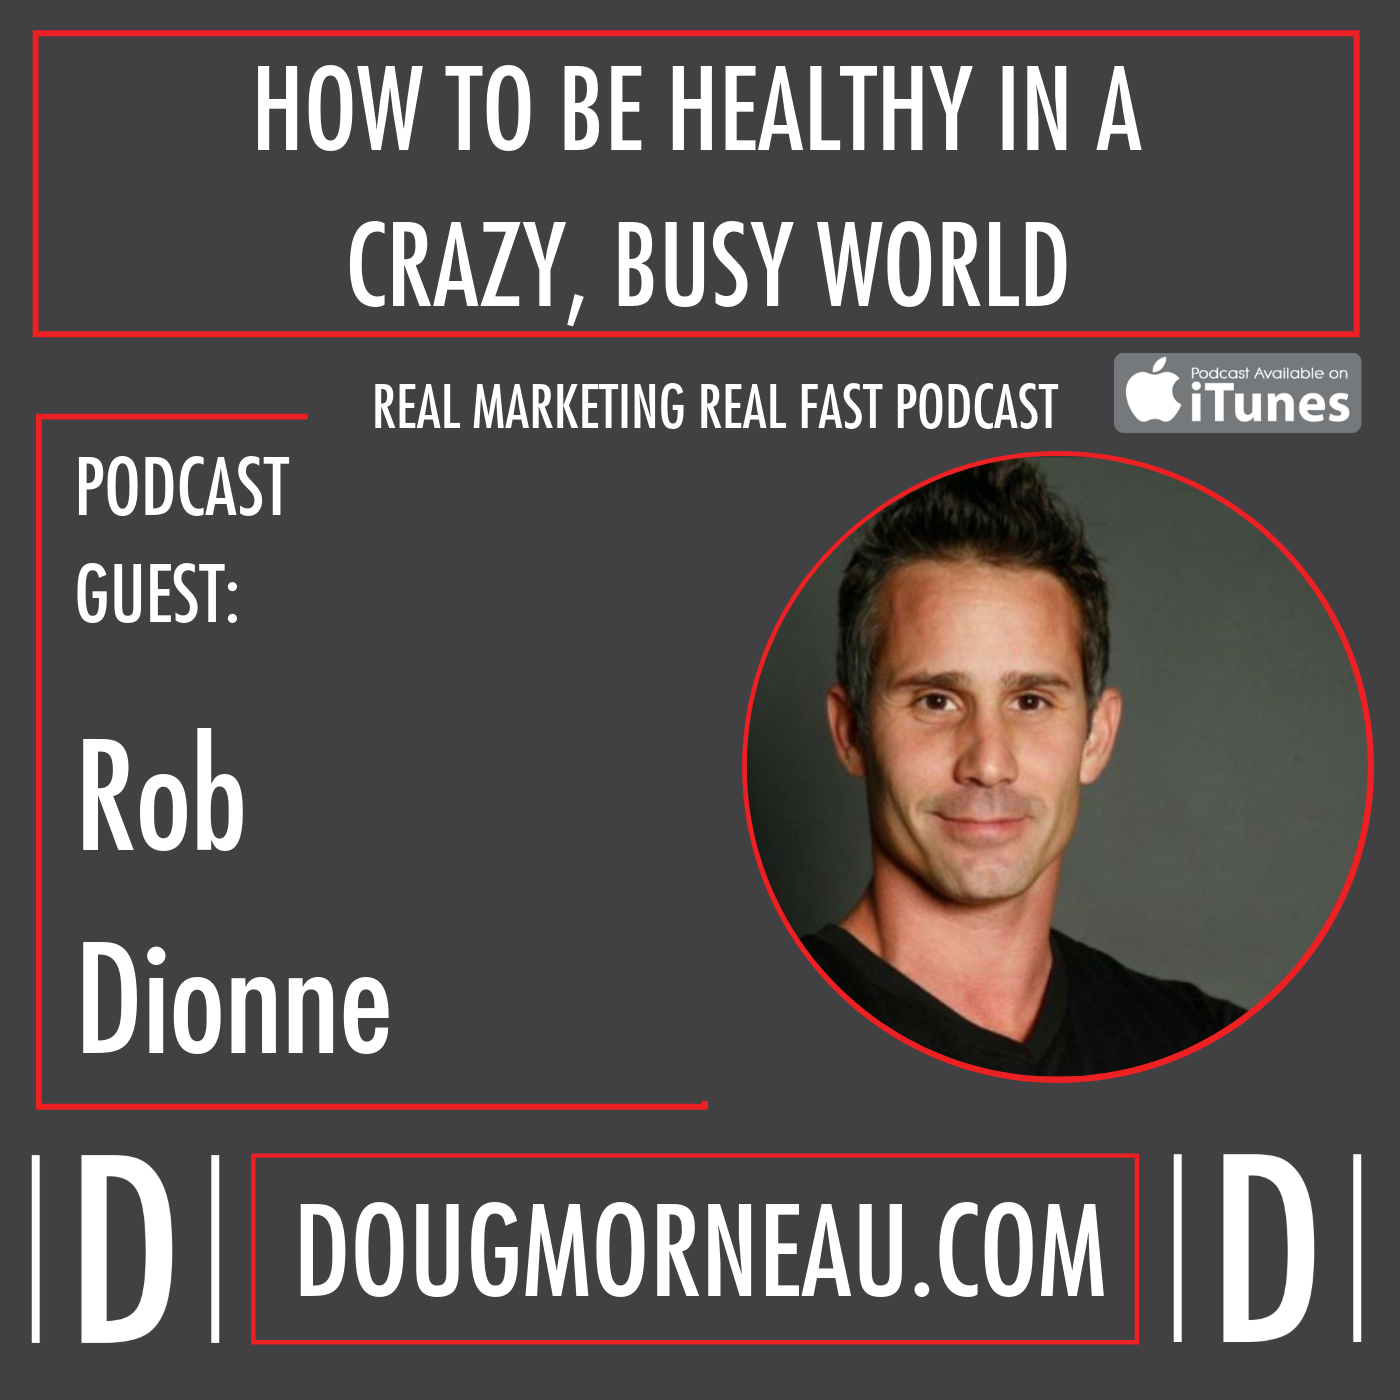 HOW TO BE HEALTHY IN A CRAZY, BUSY WORLD ROB DIONNE - DOUG MORNEAU - REAL MARKETING REAL FAST PODCAST